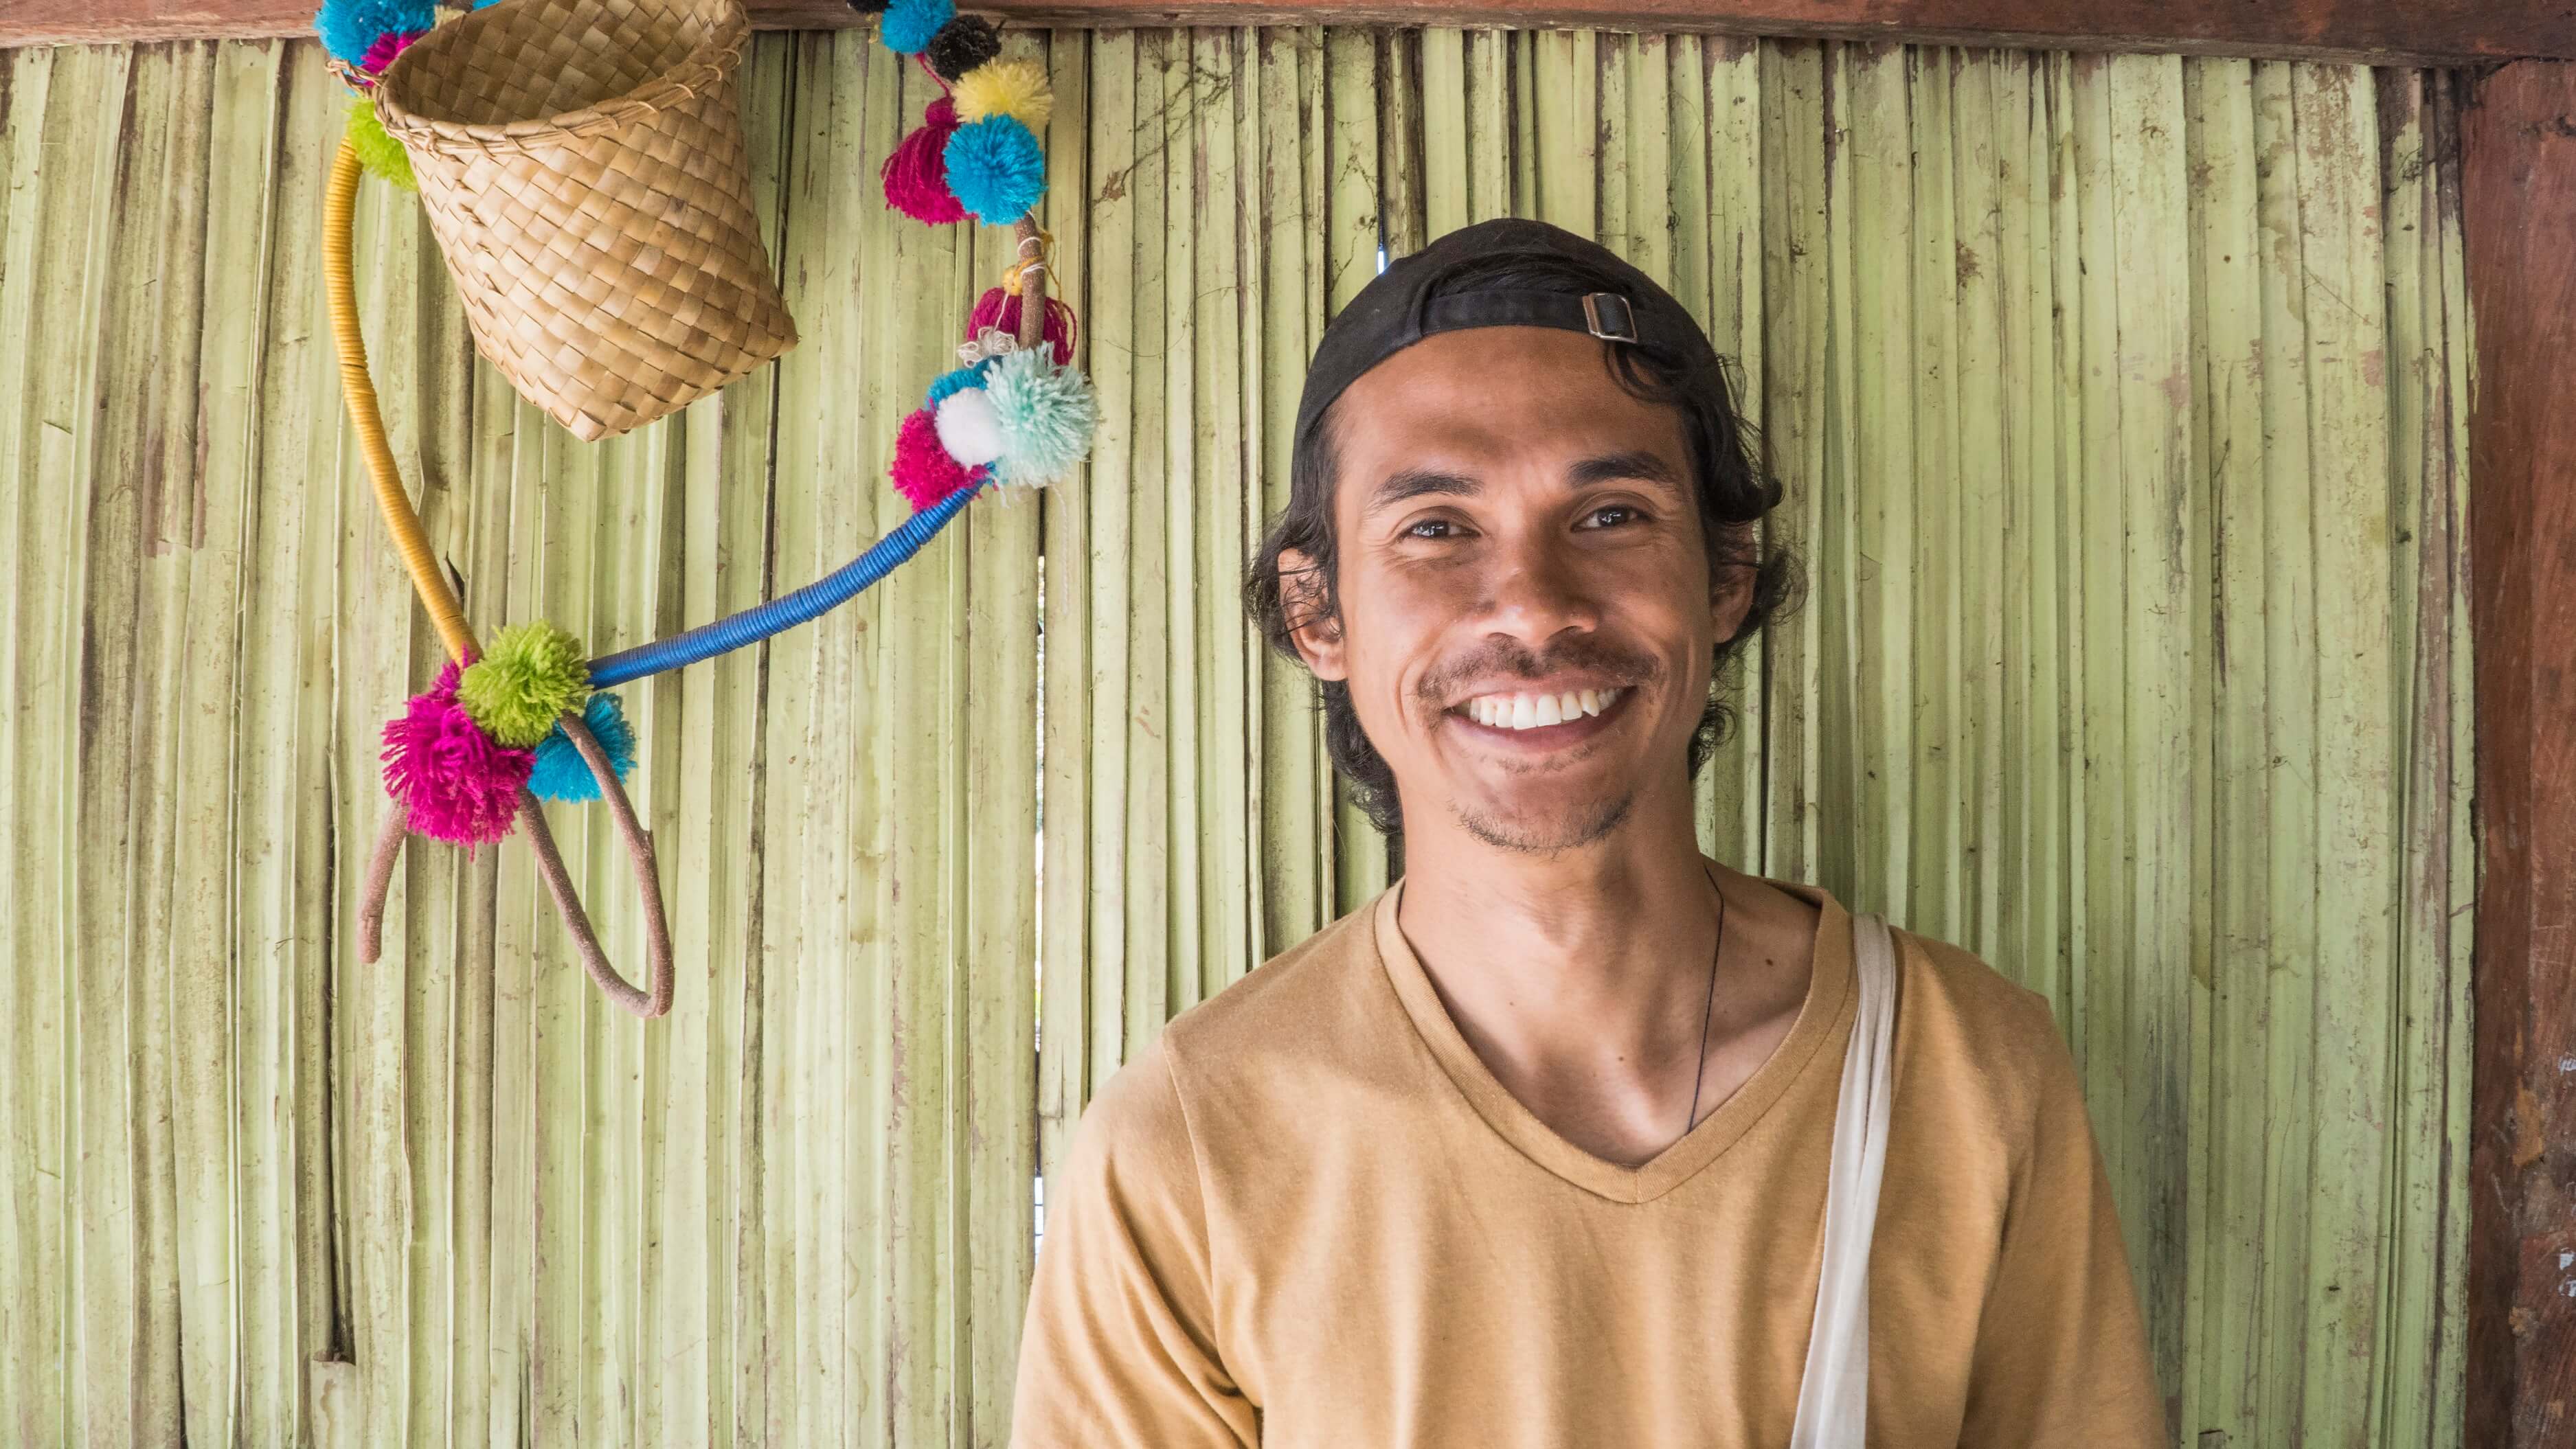 Dicky Senda is the co-founder of Lakoat.Kujawas, a social enterprise preserving the culture of Mollo Timorese through the arts and culinary innovation.